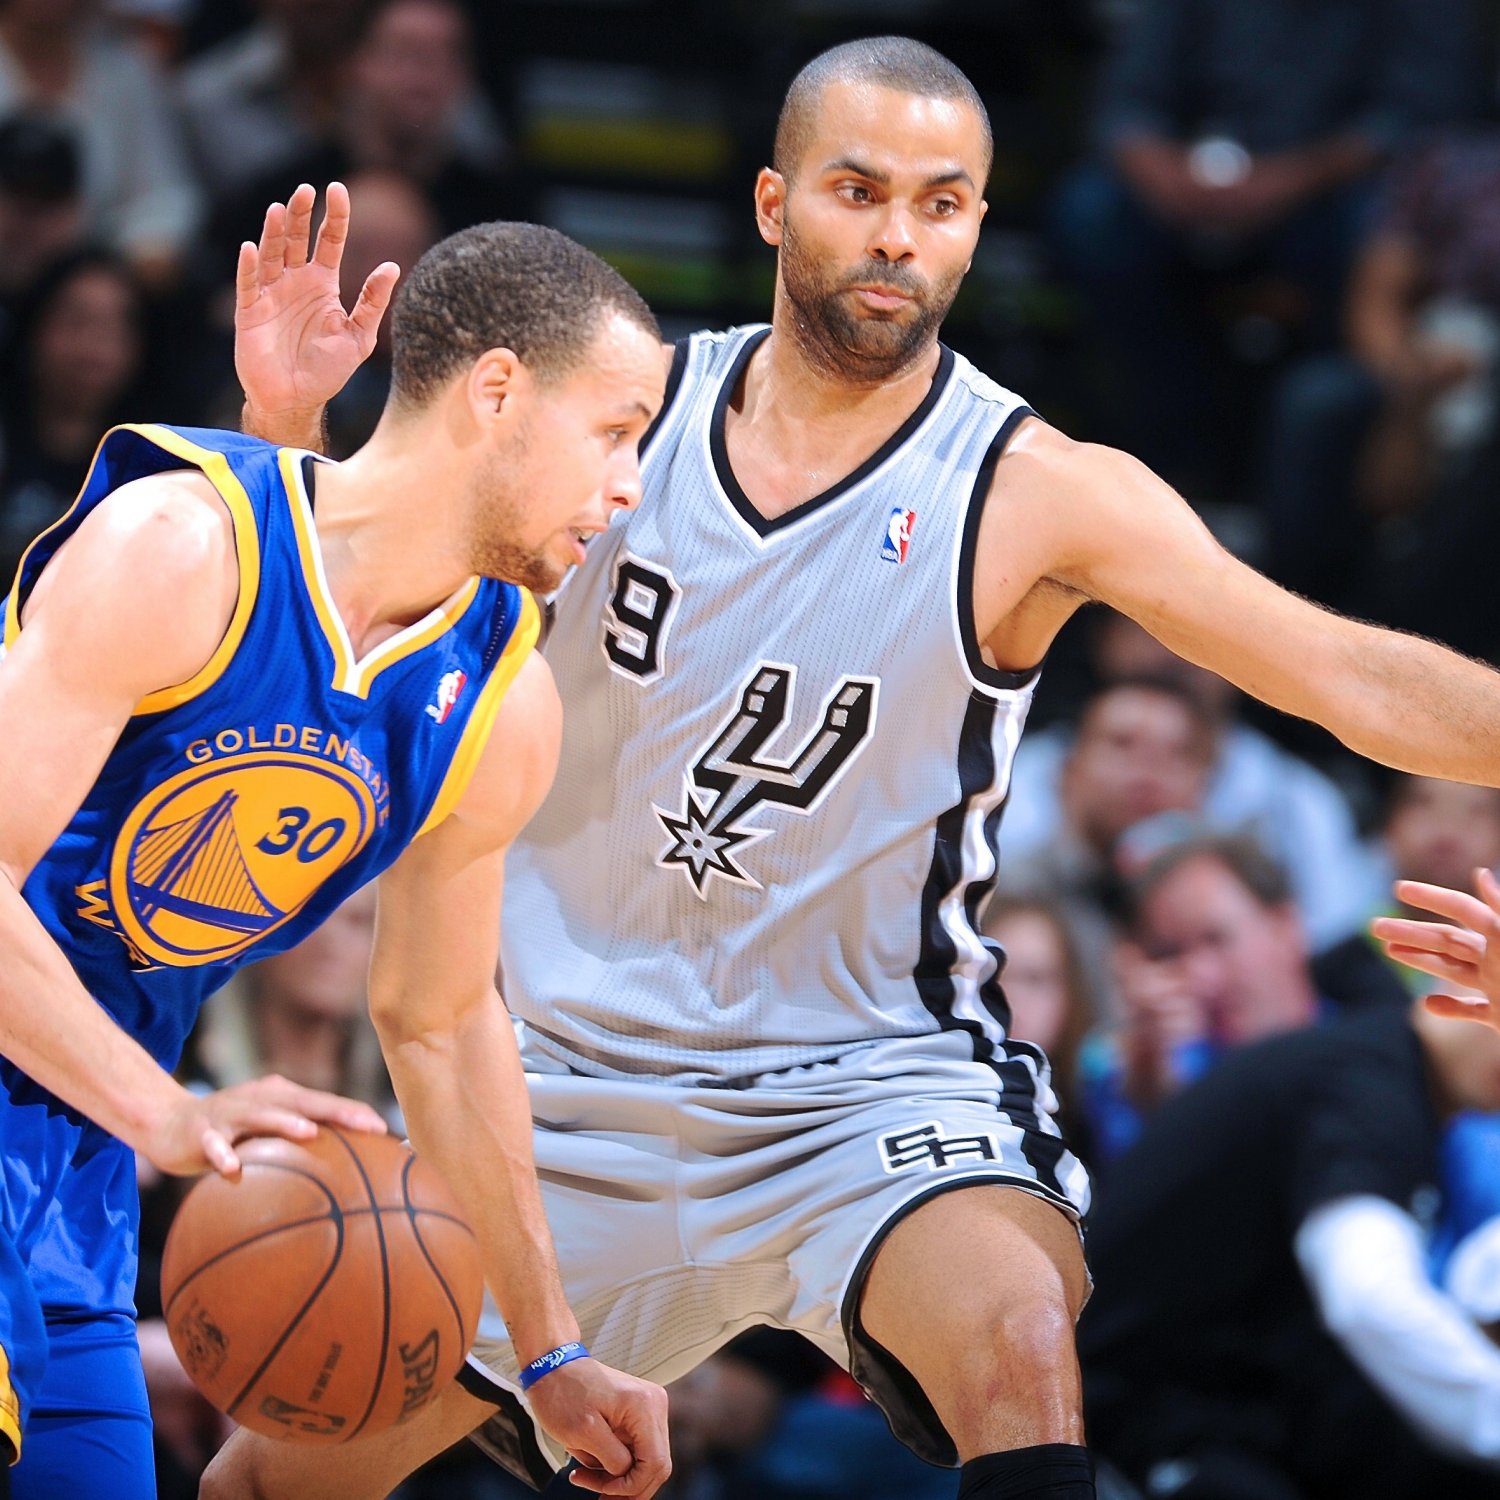 Definitive Guide to Warriors vs. Spurs and Friday's Top NBA Games